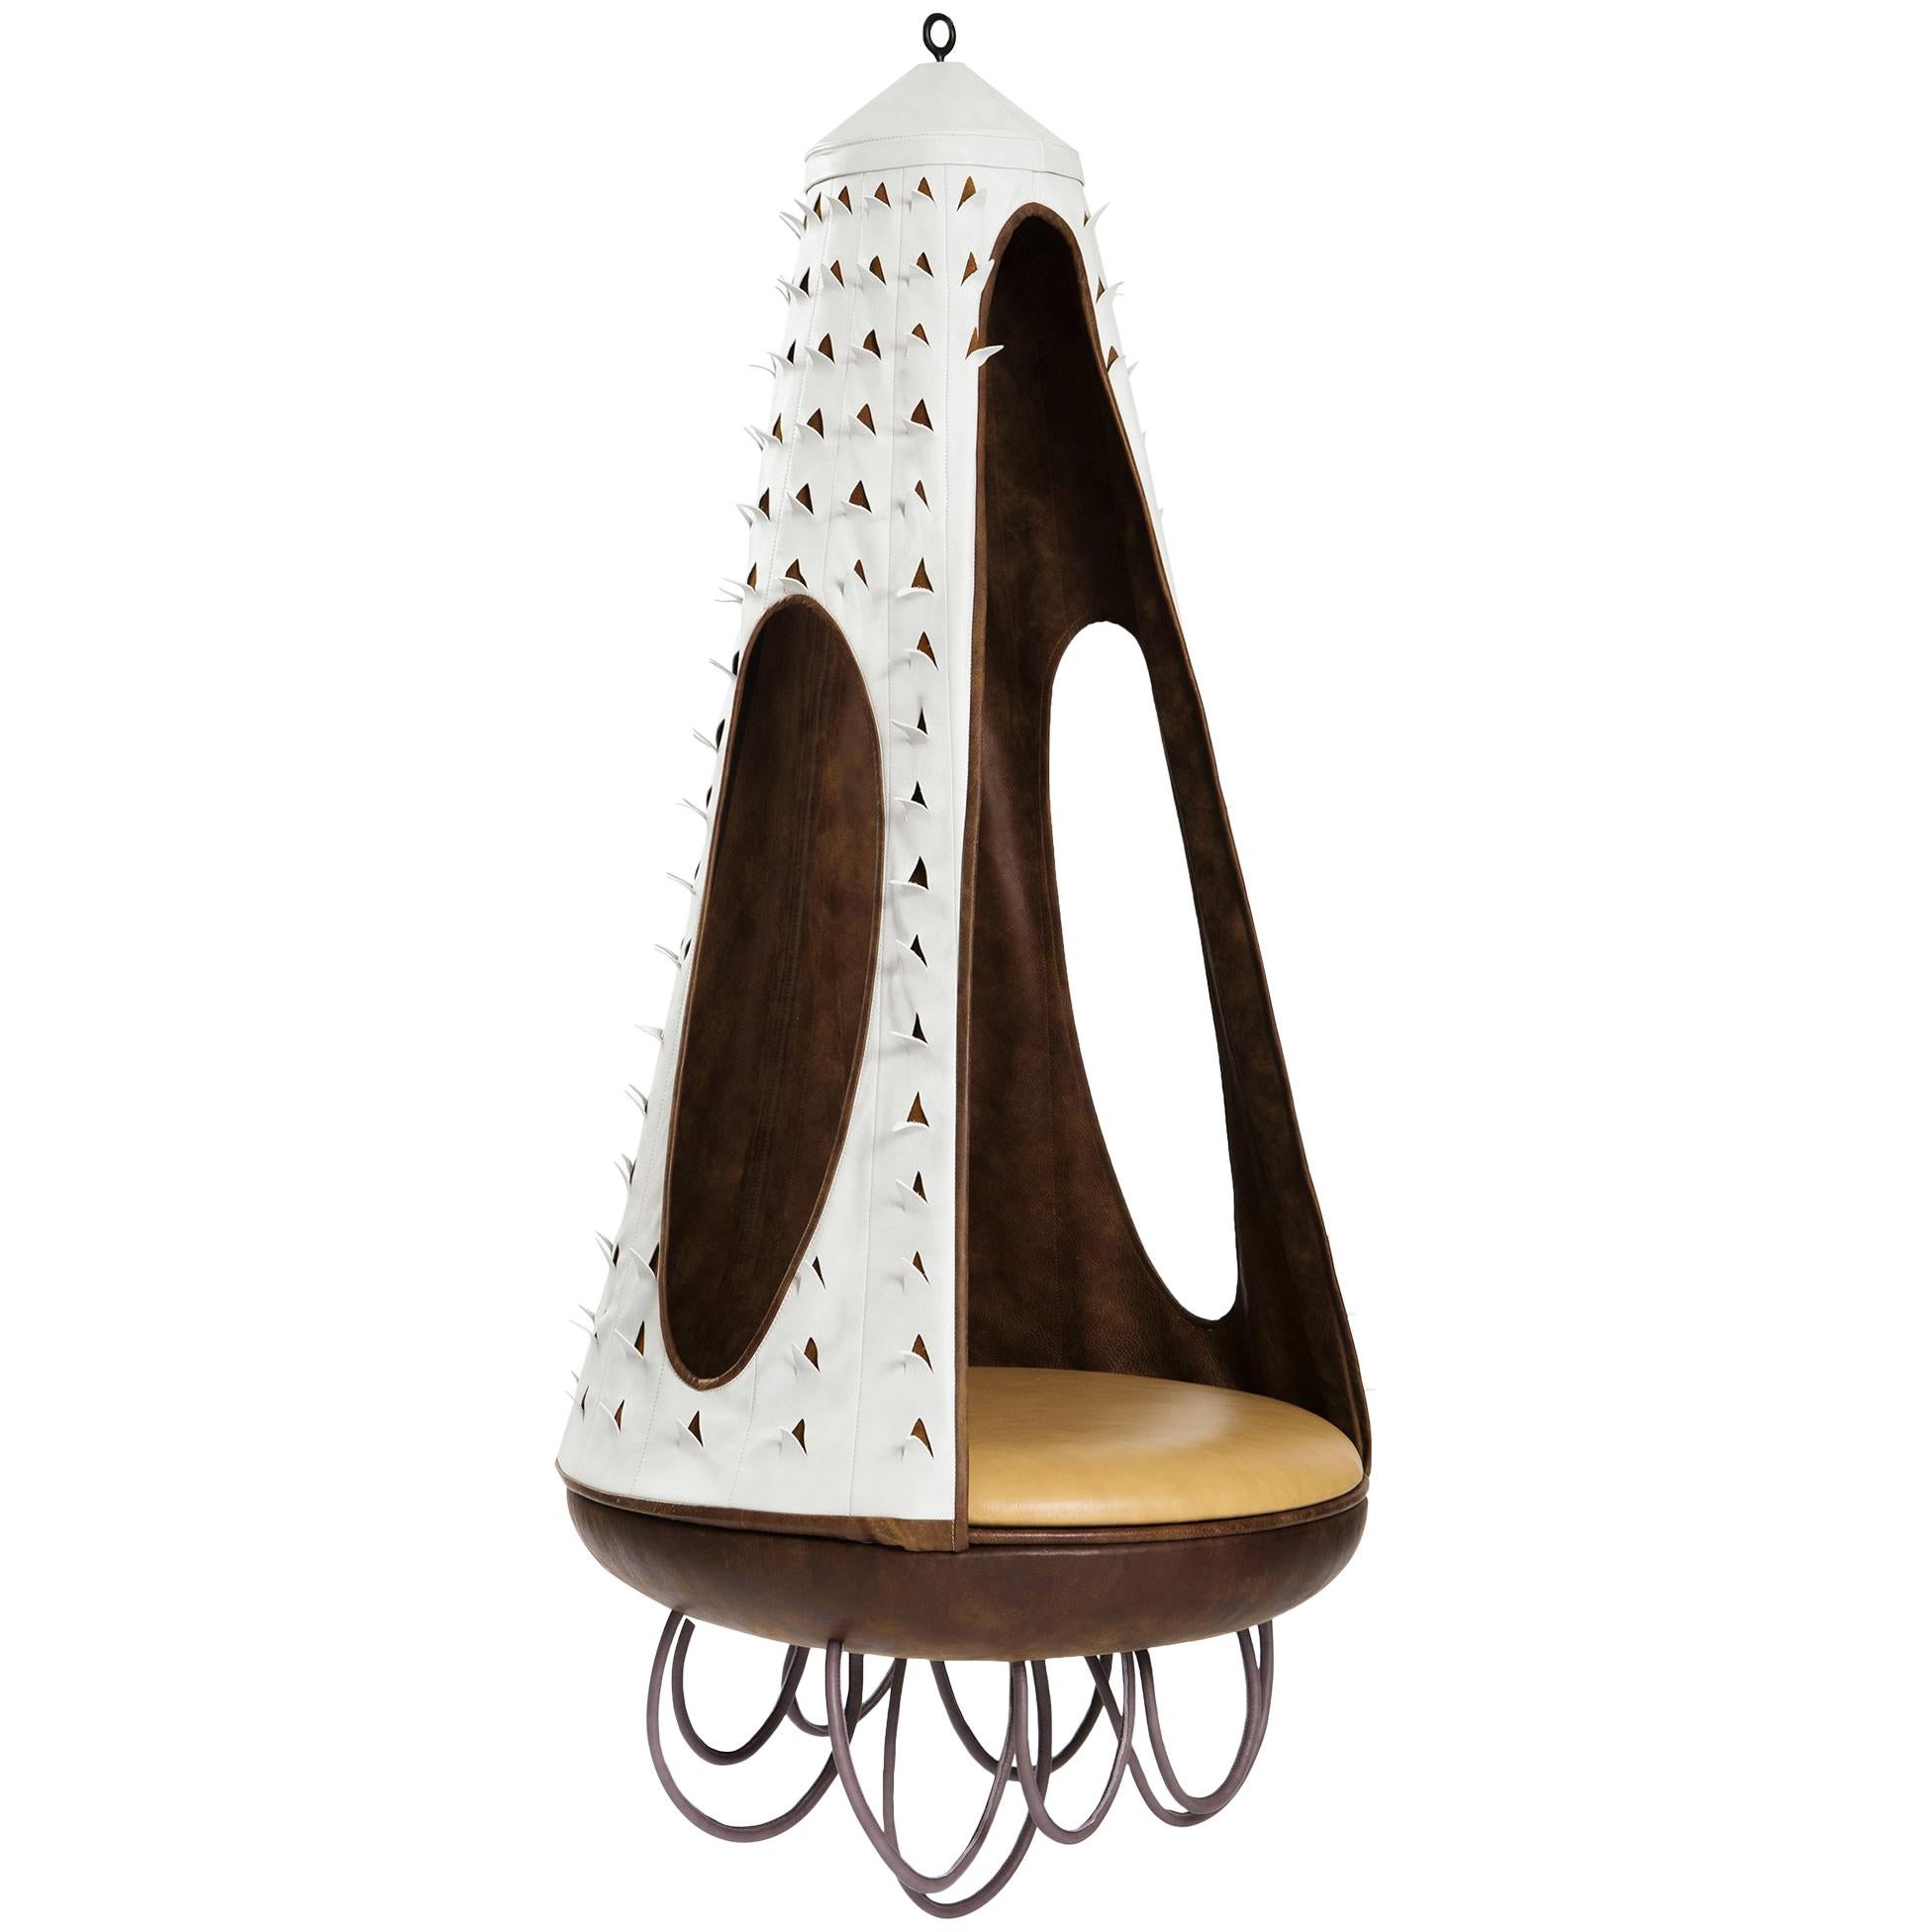 Contemporary Hanging Leather Chair For Sale